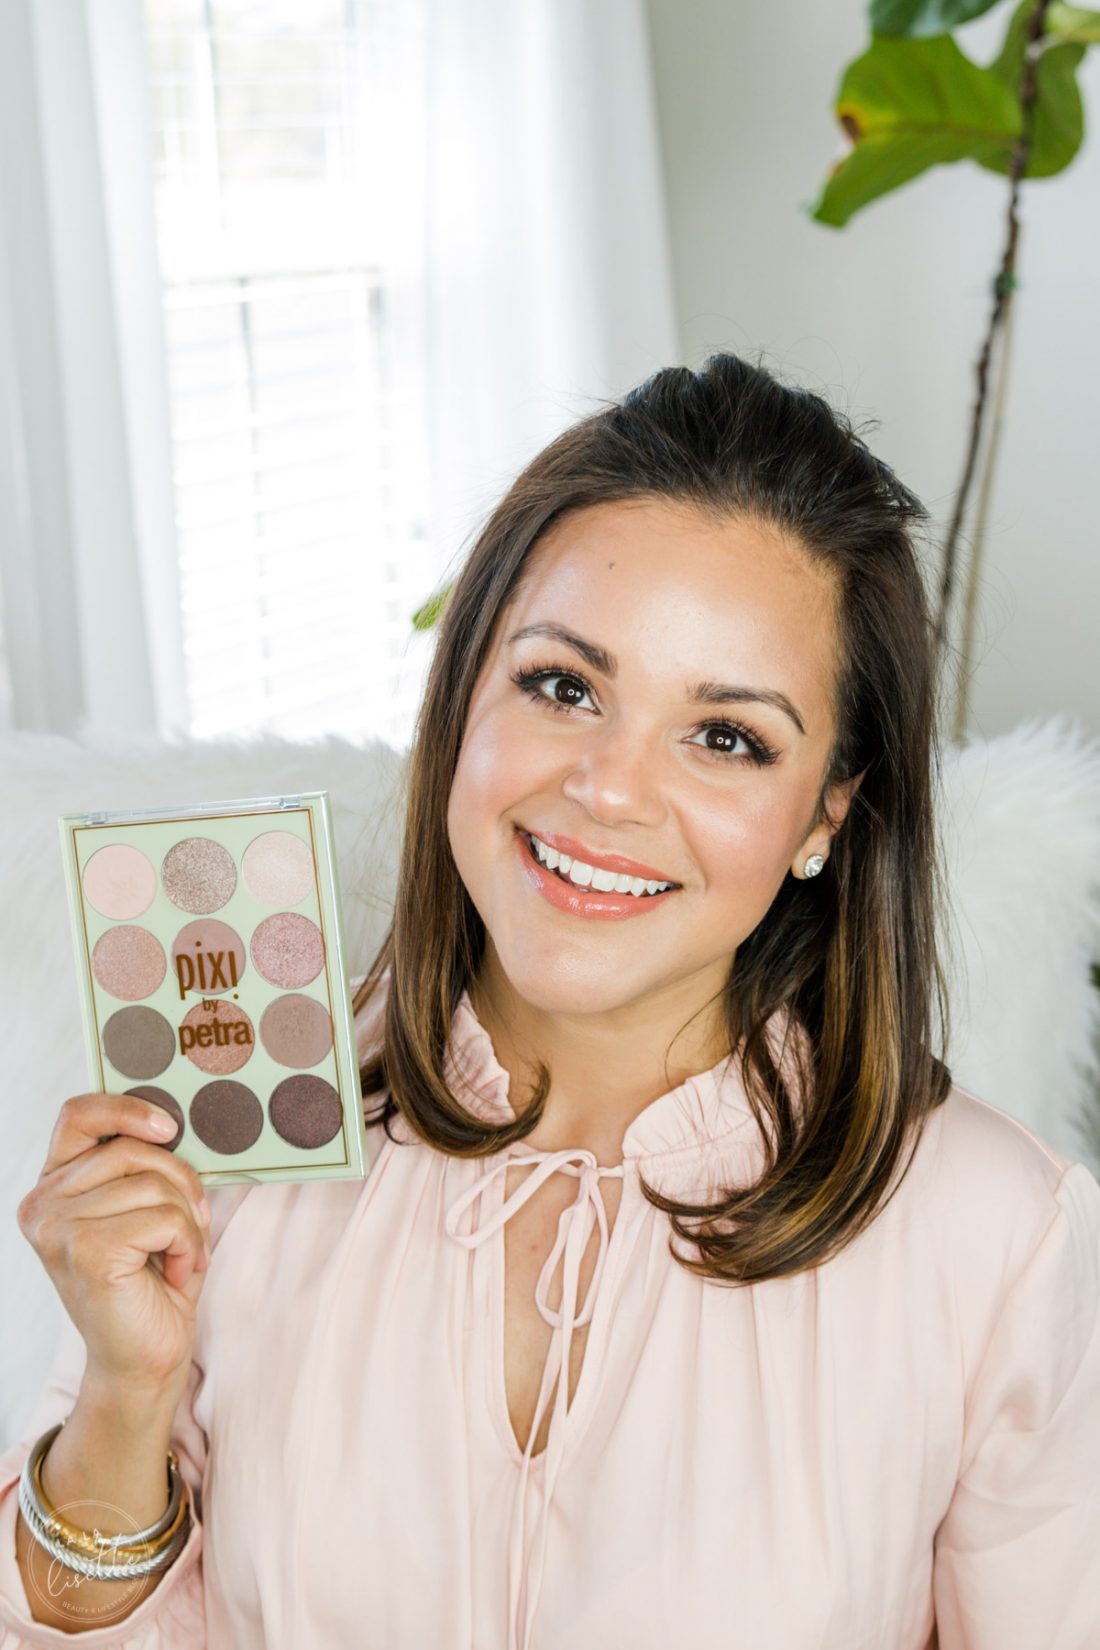 Beauty blogger with glowing spring makeup holding Pixi by Petra eyeshadow palette